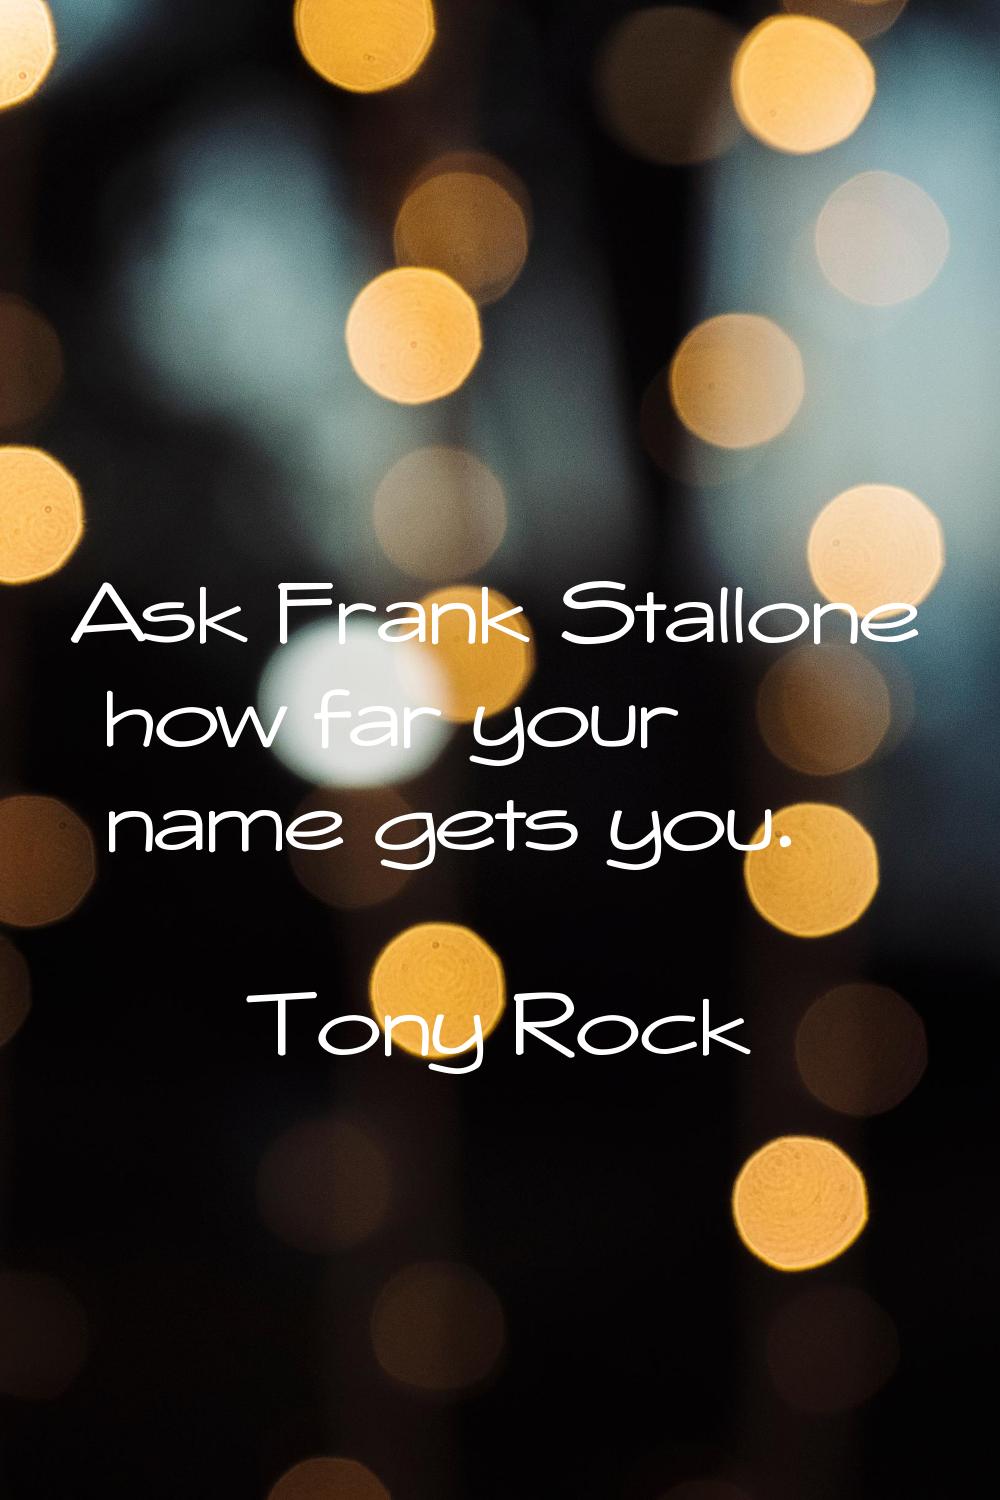 Ask Frank Stallone how far your name gets you.